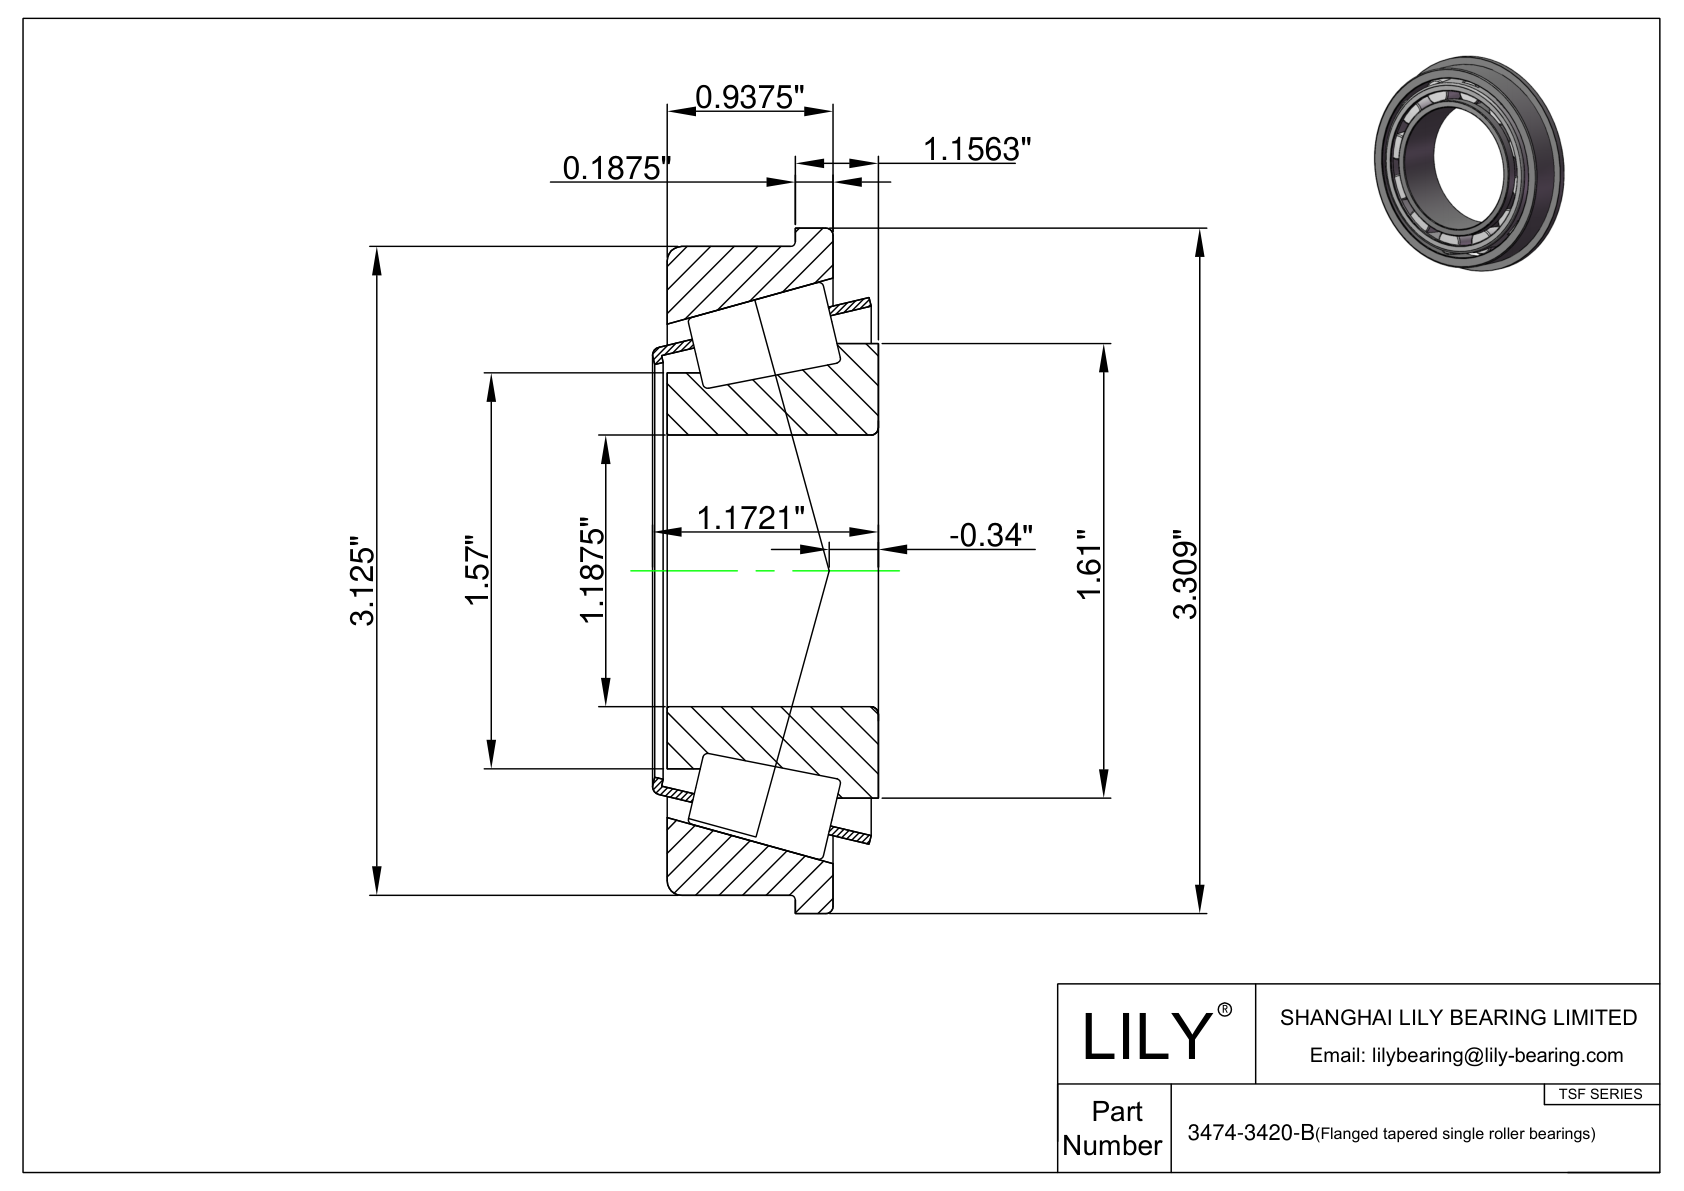 3474-3420-B TSF (Tapered Single Roller Bearings with Flange) (Imperial) cad drawing